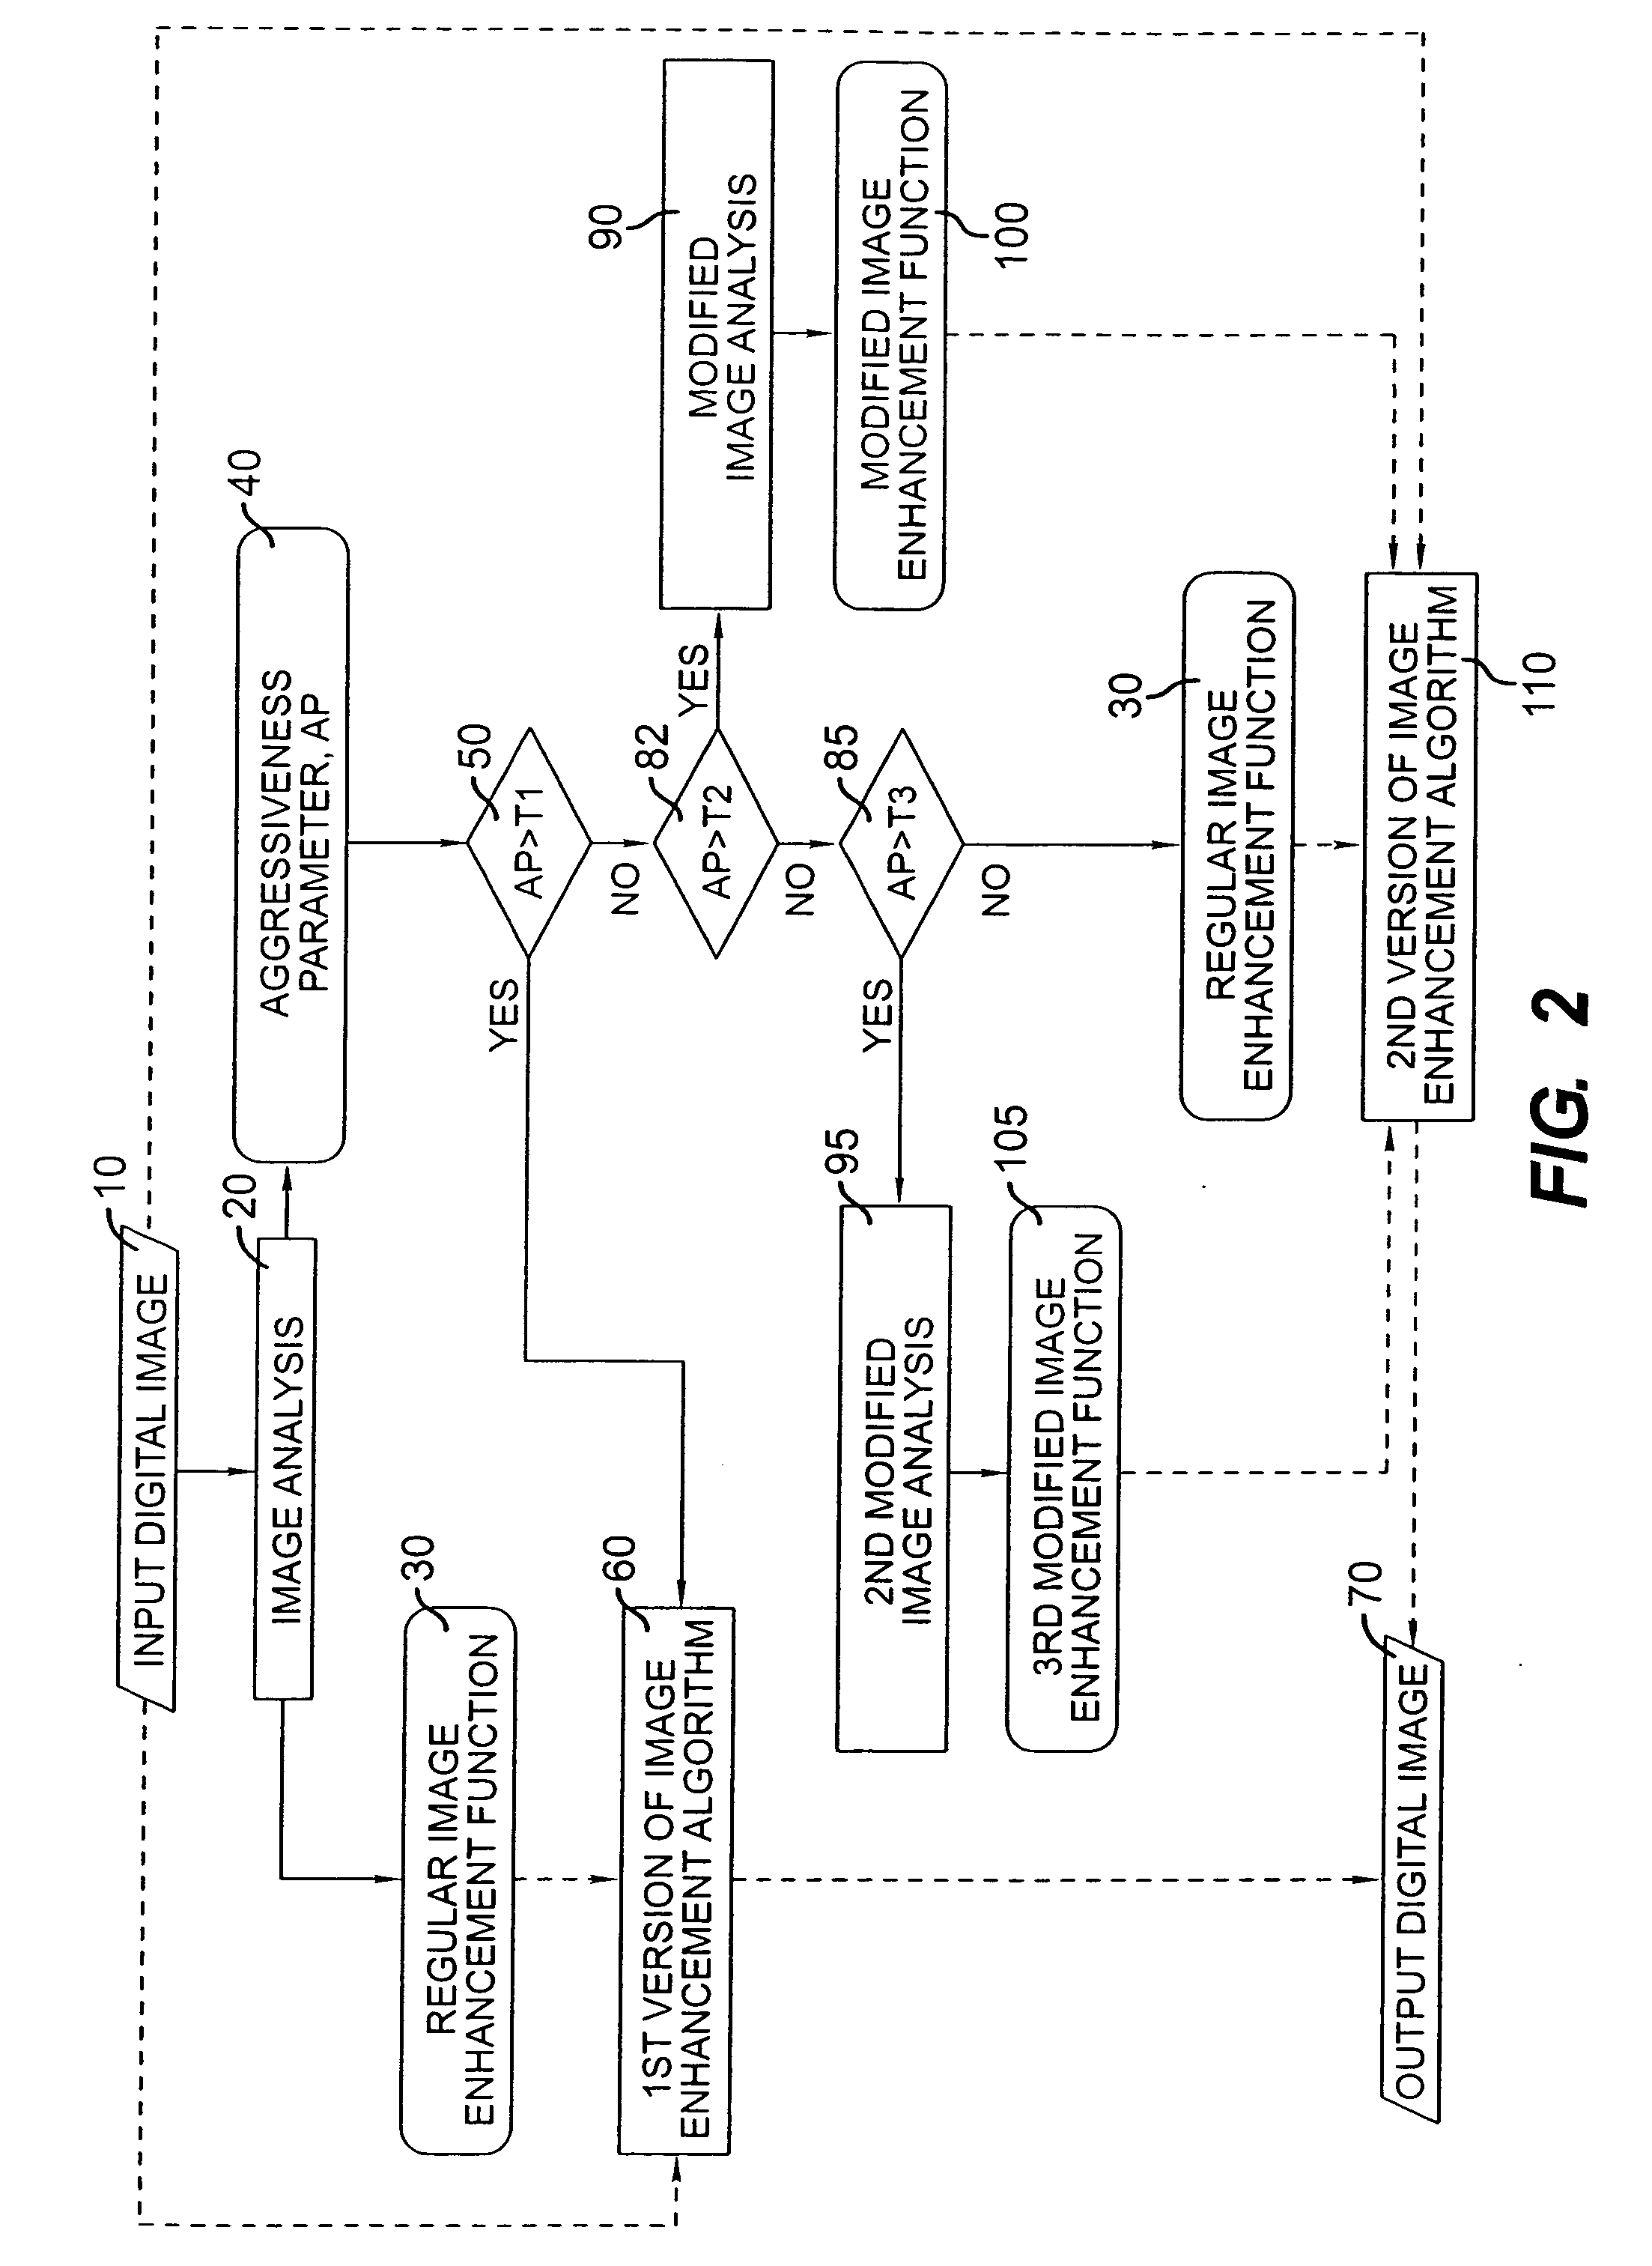 Selection of alternative image processing operations to maintain high image quality